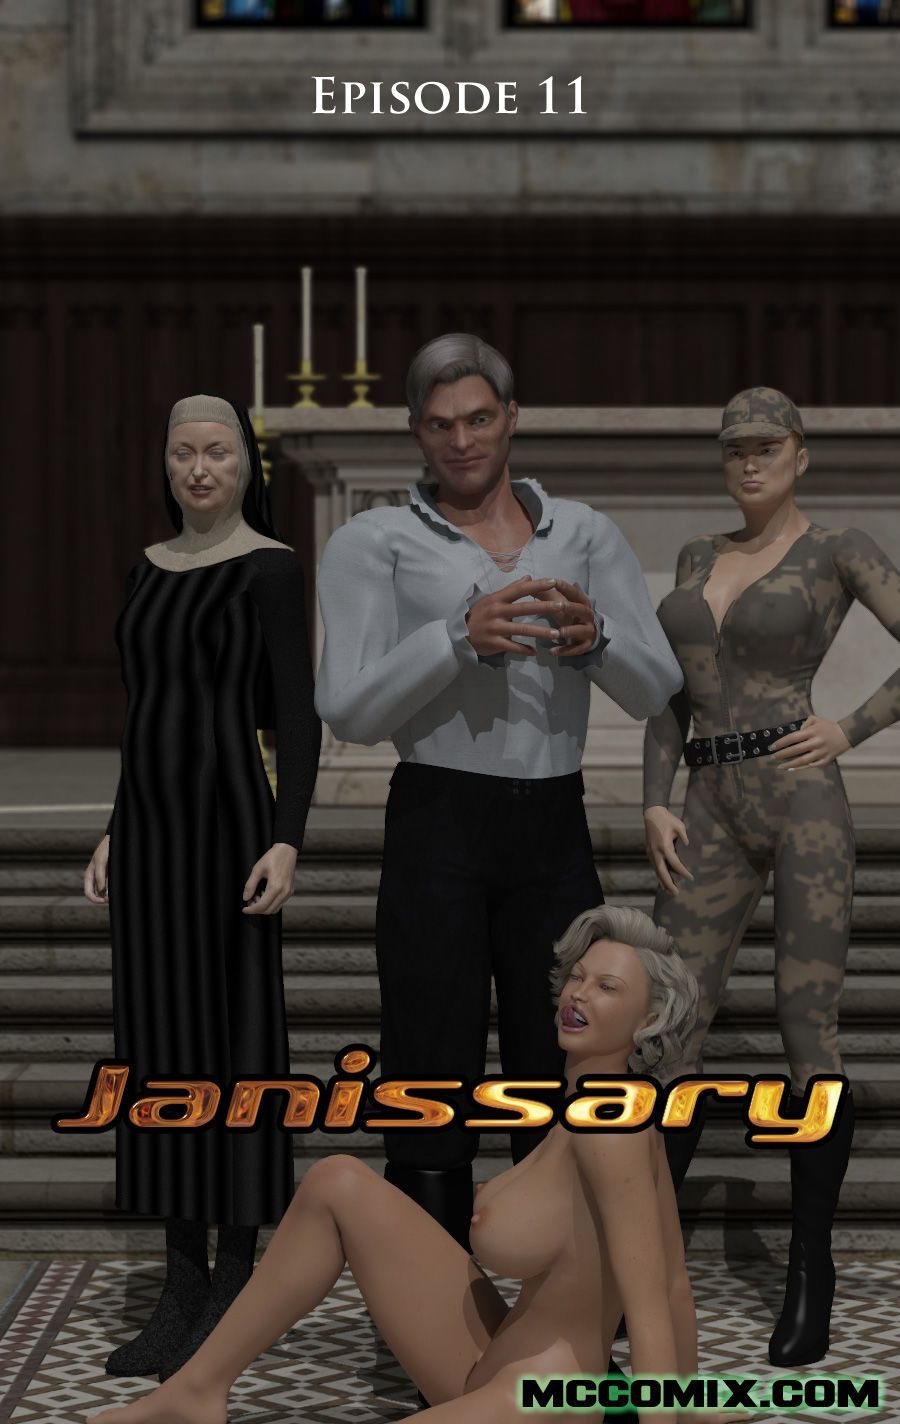 [Tecknophyle] Janissary 1-32 (Complete) - part 15